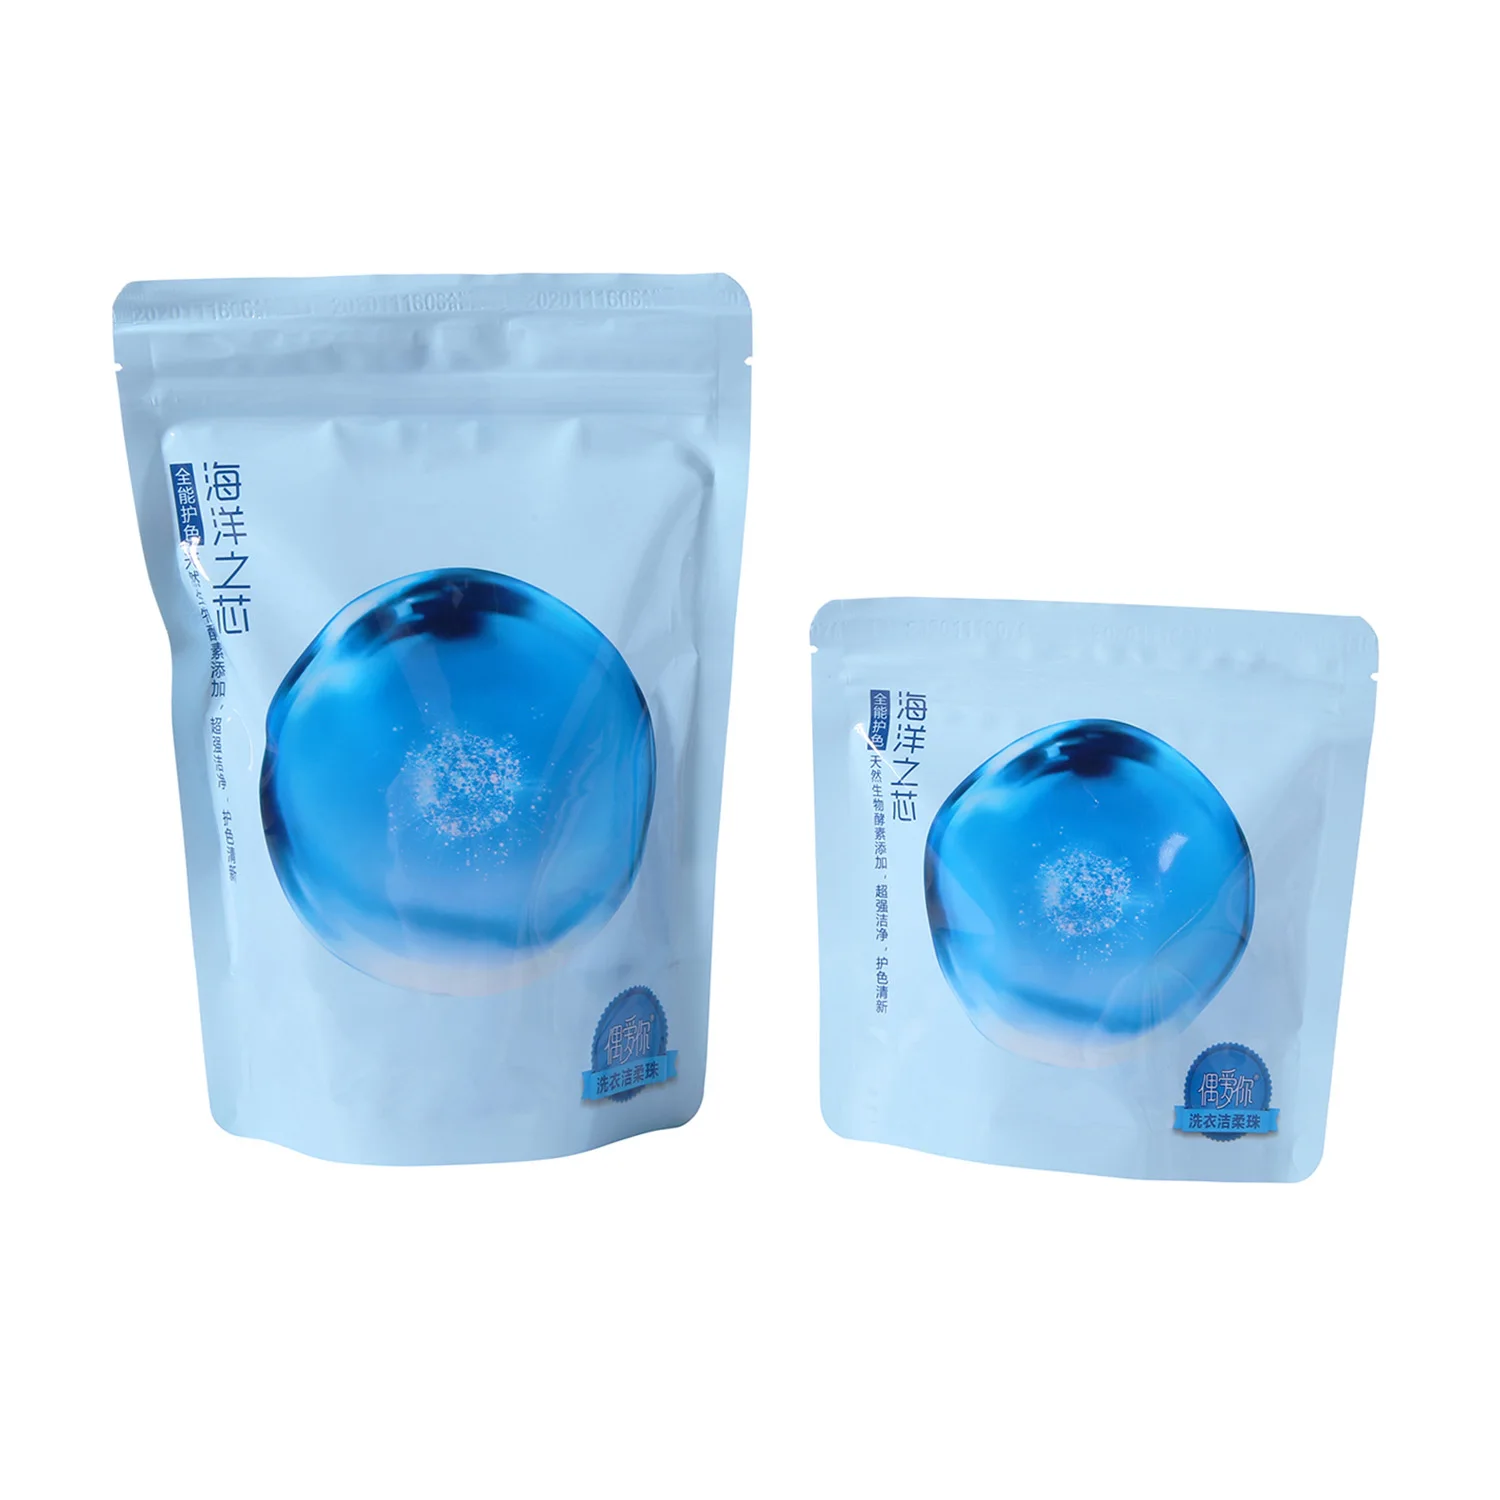 Sustainable 20g Laundry Pod All in 1 Pods Colour Washing Aroma Capsules Laundry Room for Anti Bacteria Above 60%